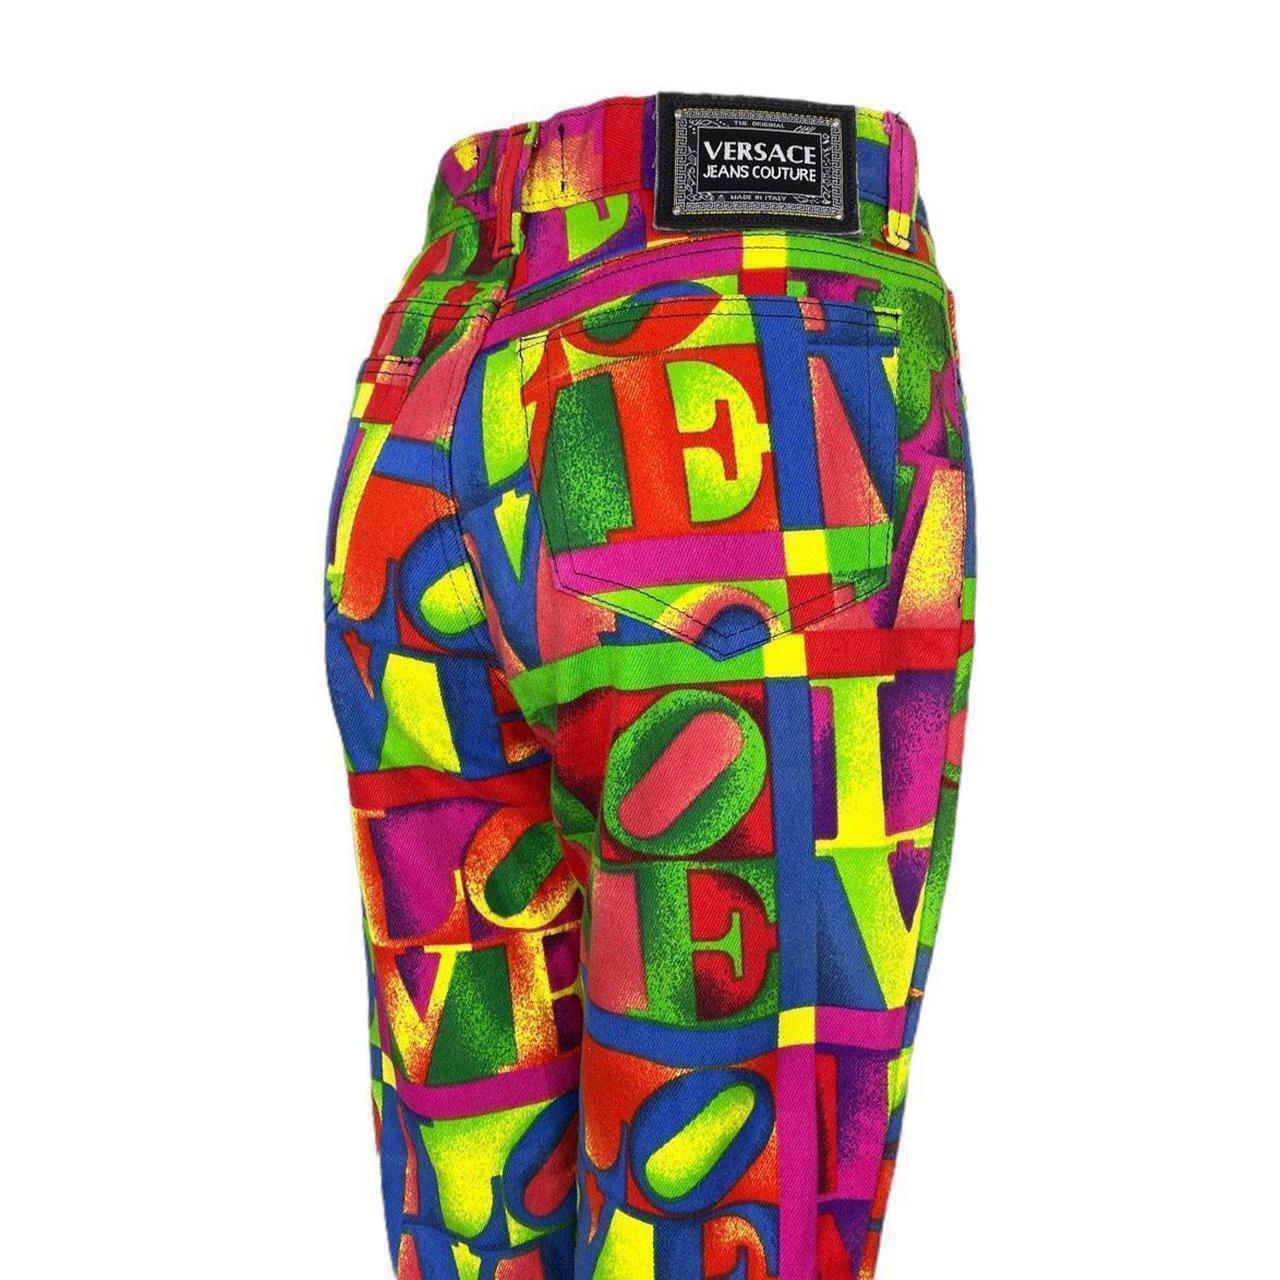 Versace Love Printed Jeans Couture Spring  / Summer 1995 Vintage Print 

Rare iconic Design and print by artist,  Robert Indiana

Iconic and sought-after Pop Art Love Printed Jeans

High-Waisted Trousers  / Pants

CONDITION: This item is a